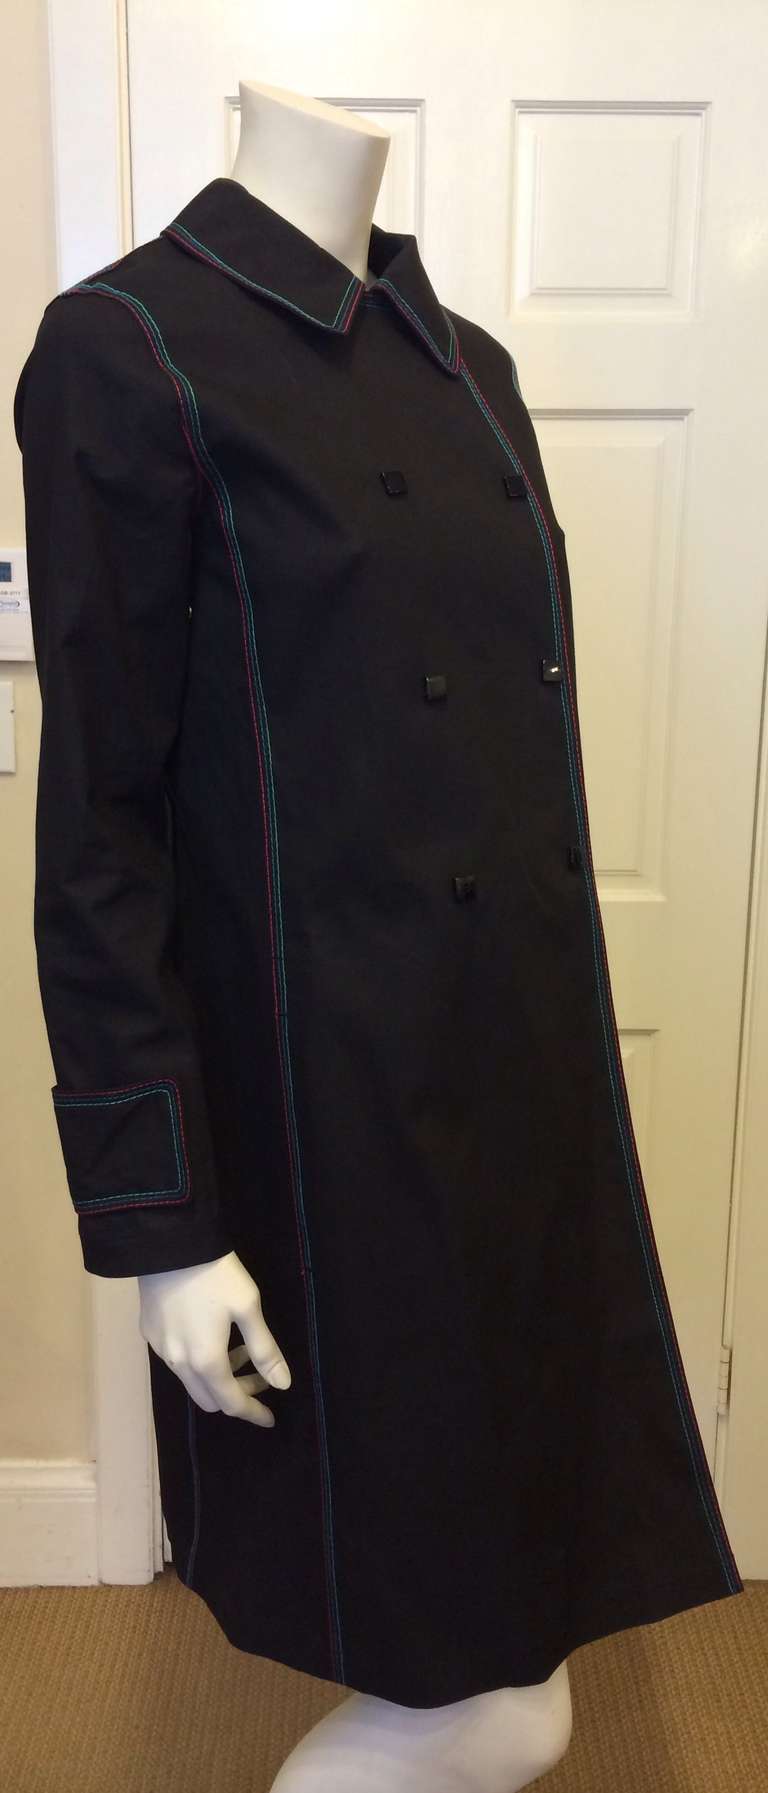 This coat has all the traditional features that one would expect in a trench, plus some fun, colorful details to spice things up!  The triple stitching is all done in green, blue and pink thread, for a youthful feel.  The double breasted buttons are